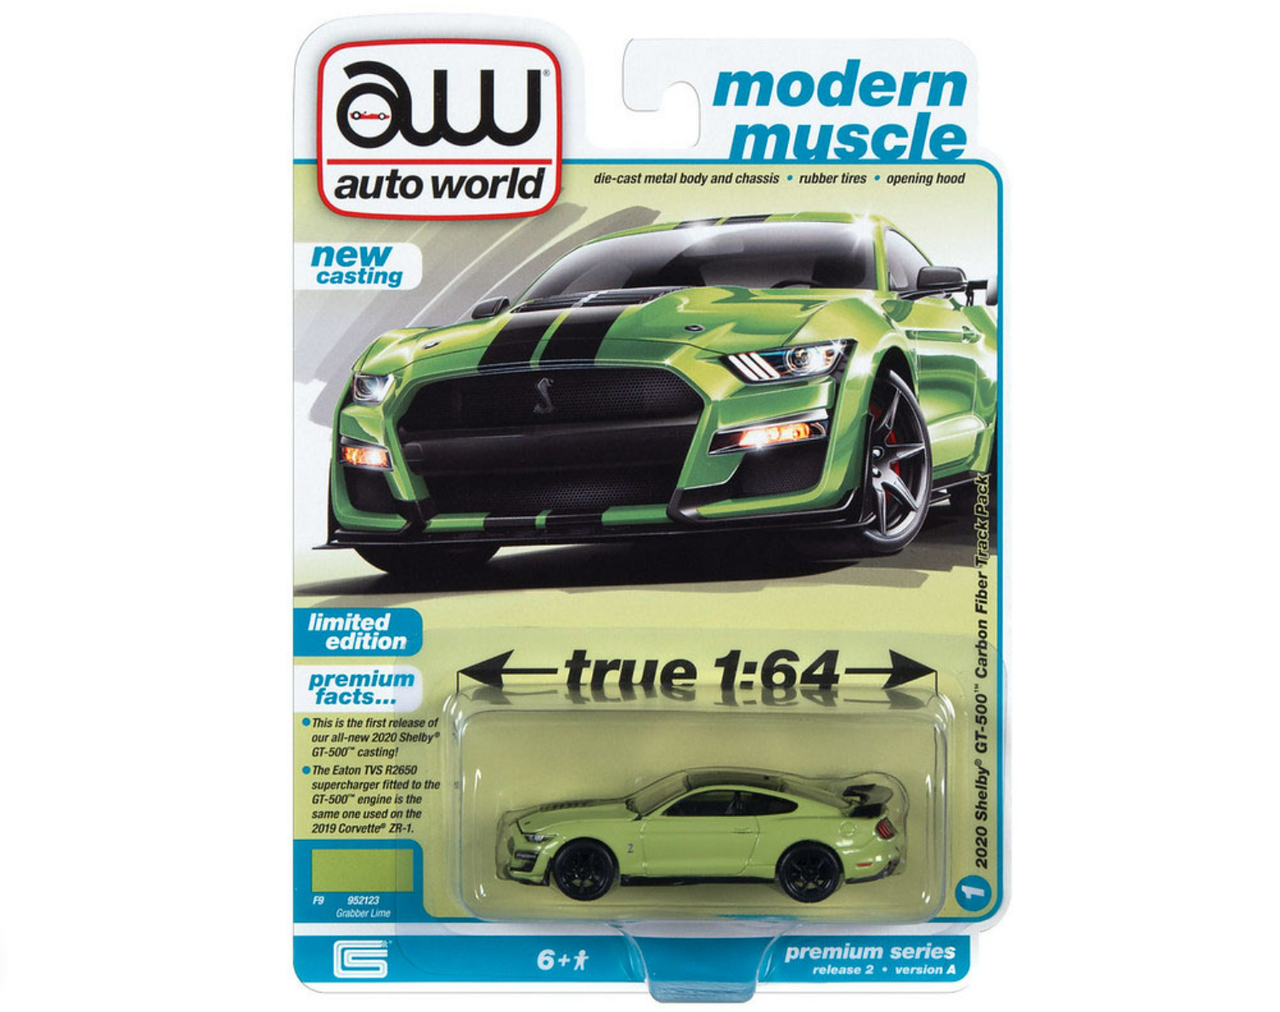 1/64 Auto World Premium 2020 Ford Mustang Shelby GT500 Grabber Green Diecast Car Model